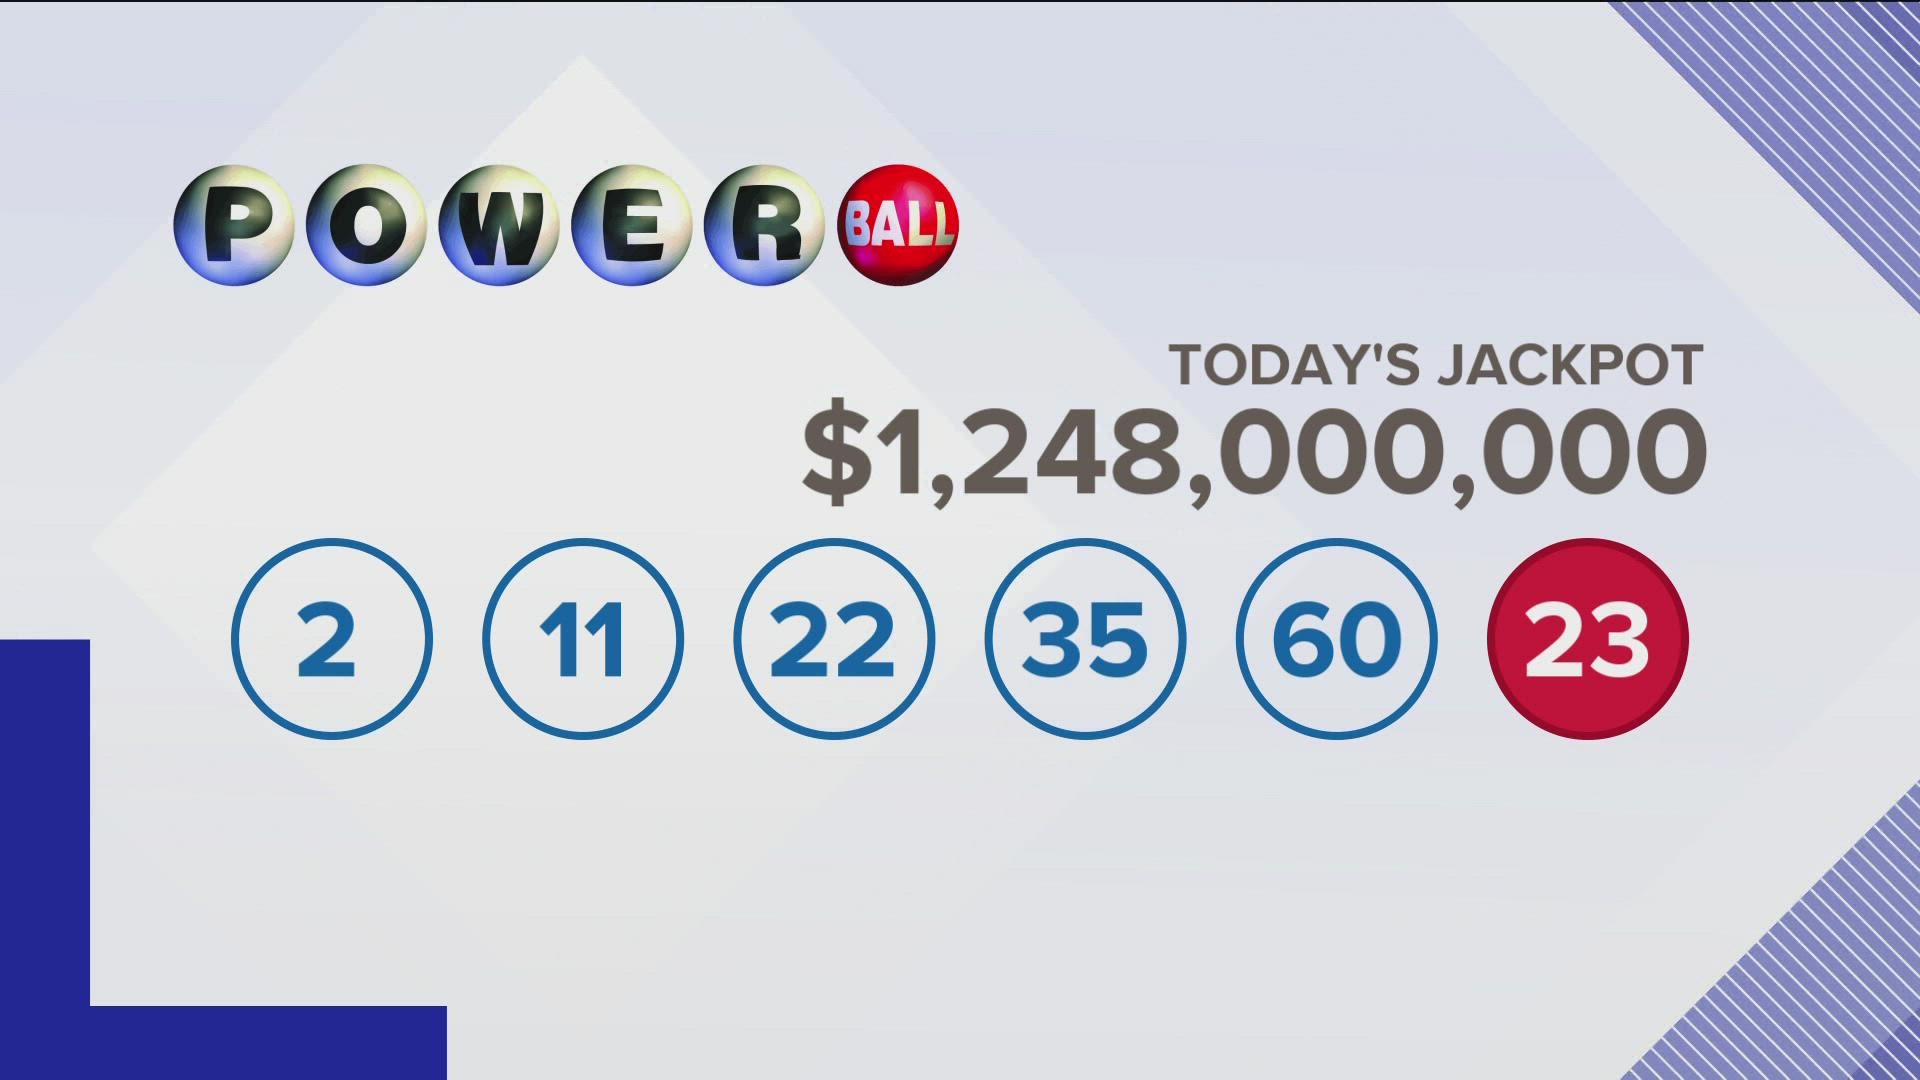 With no winner on Wednesday, the estimated jackpot for Saturday is now $1.5 billion, just shy of the largest jackpot ever.